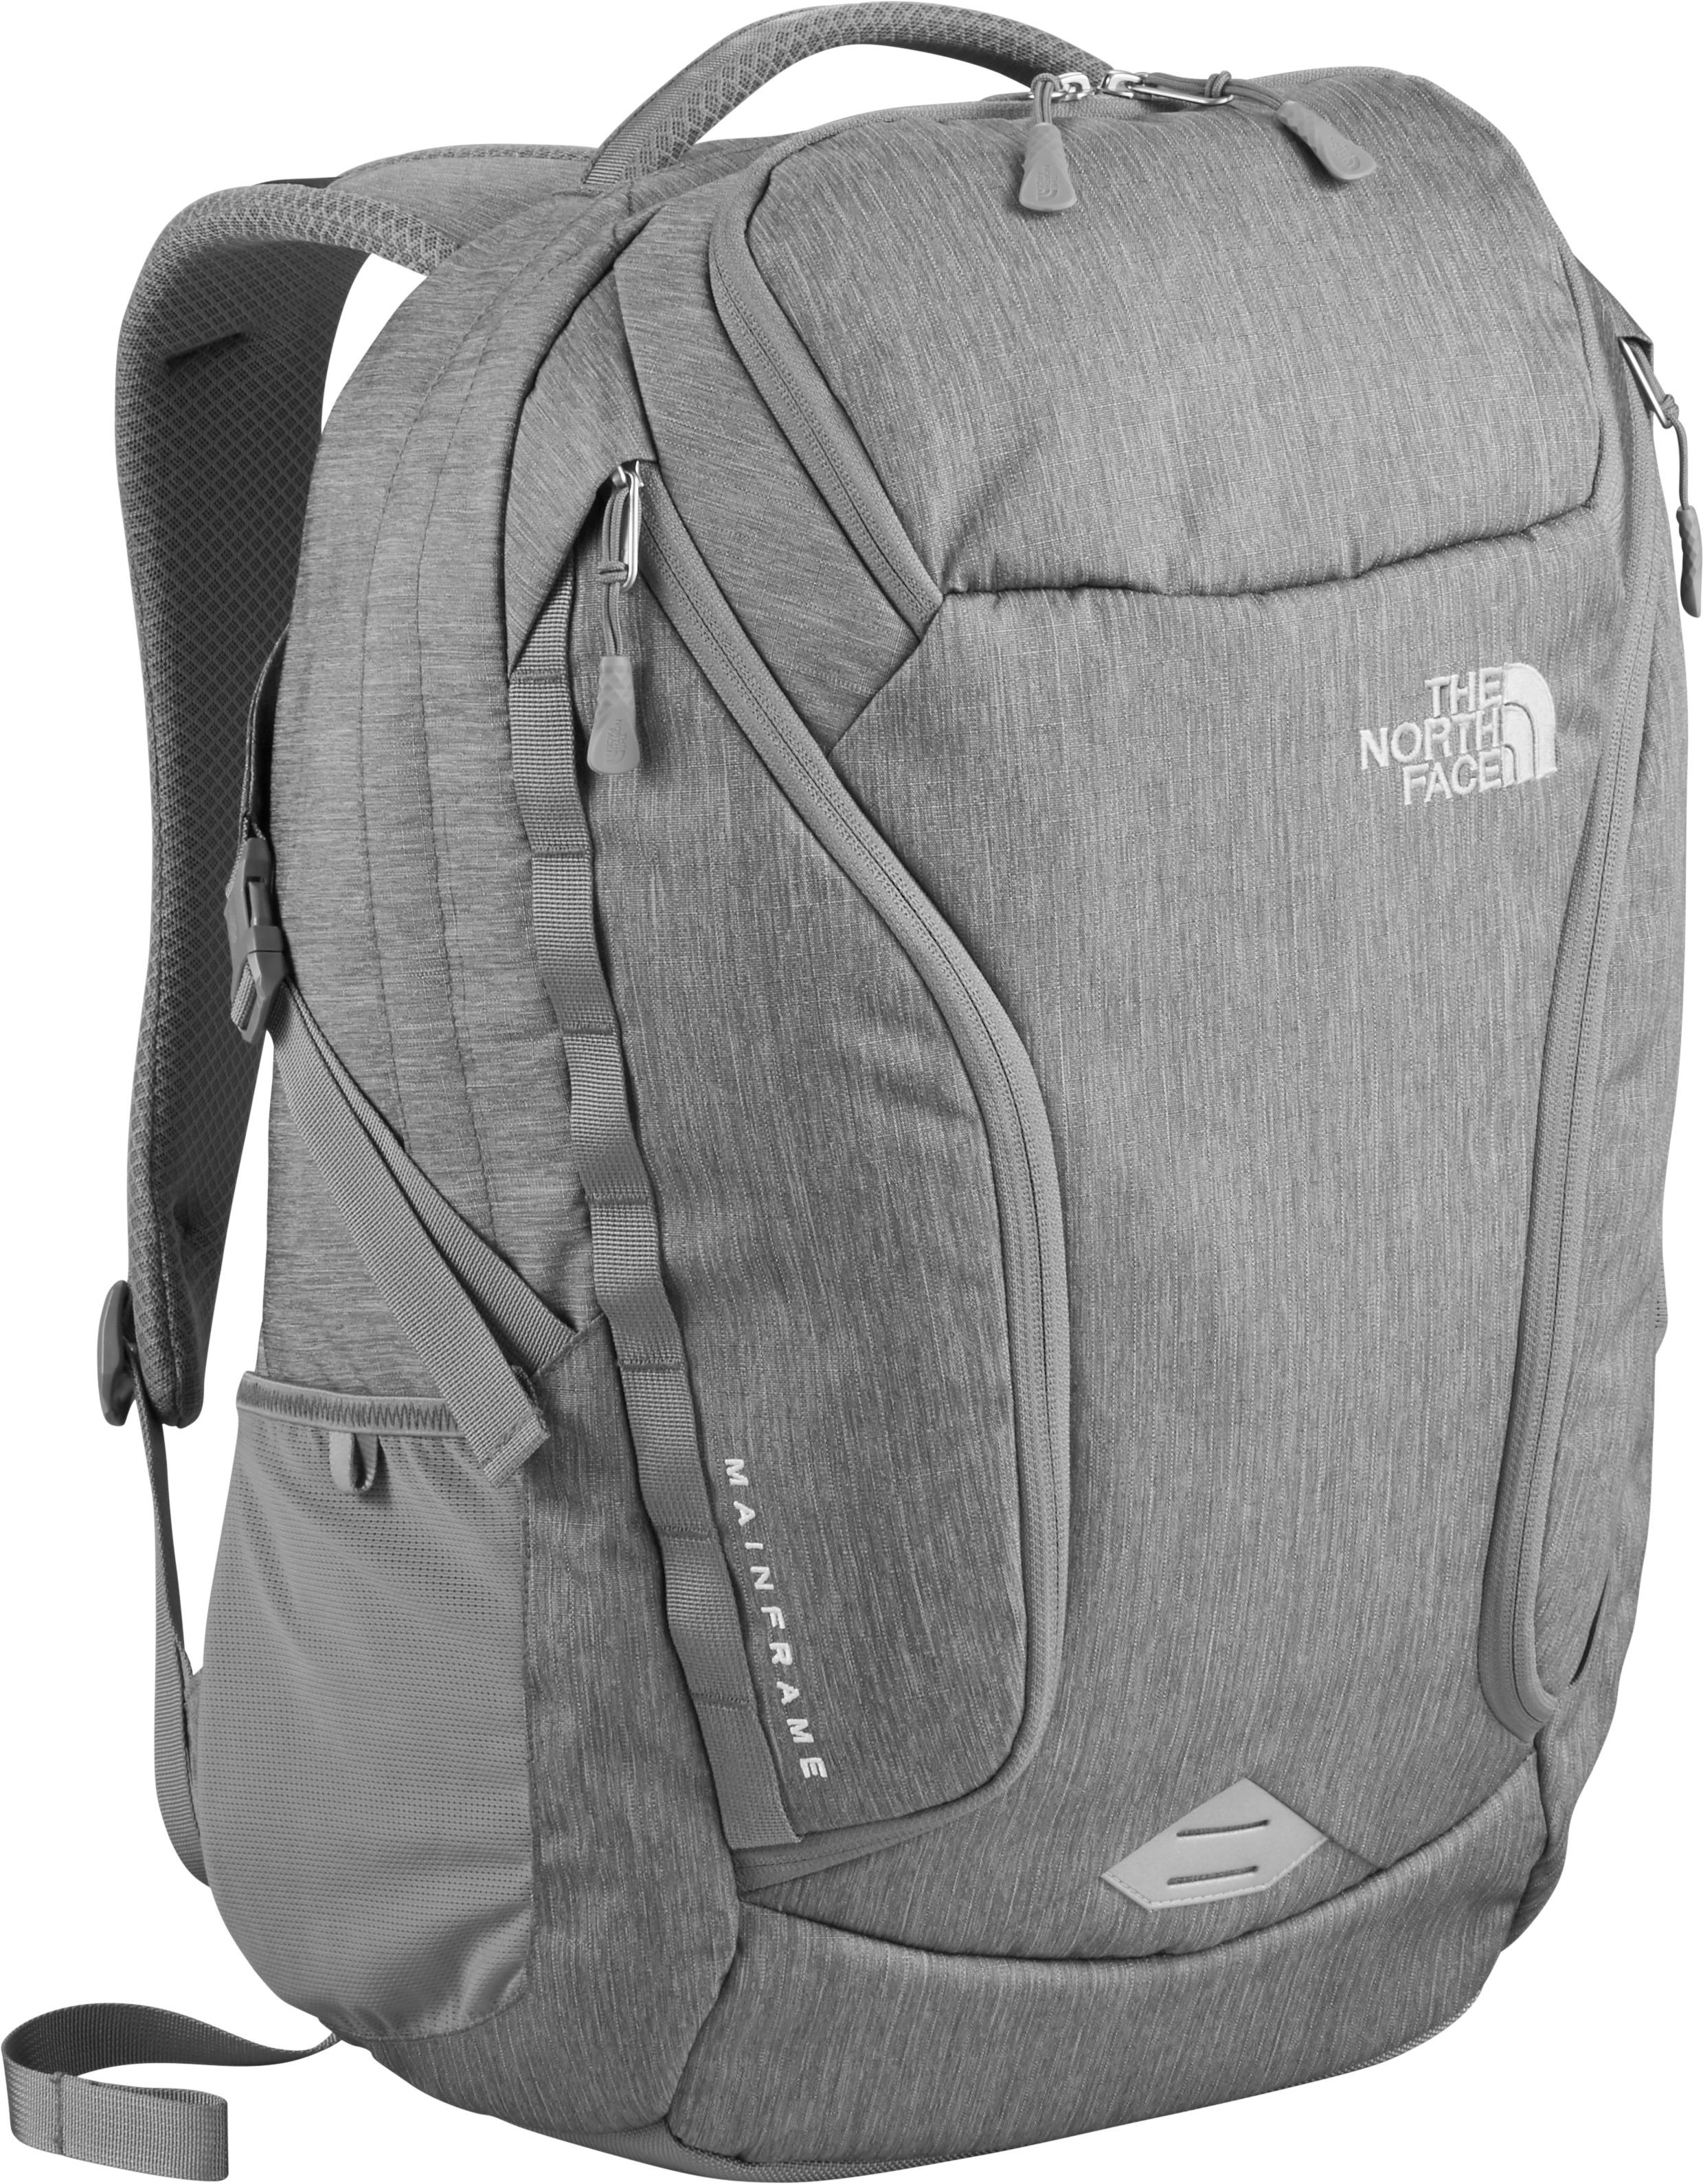 north face mainframe backpack